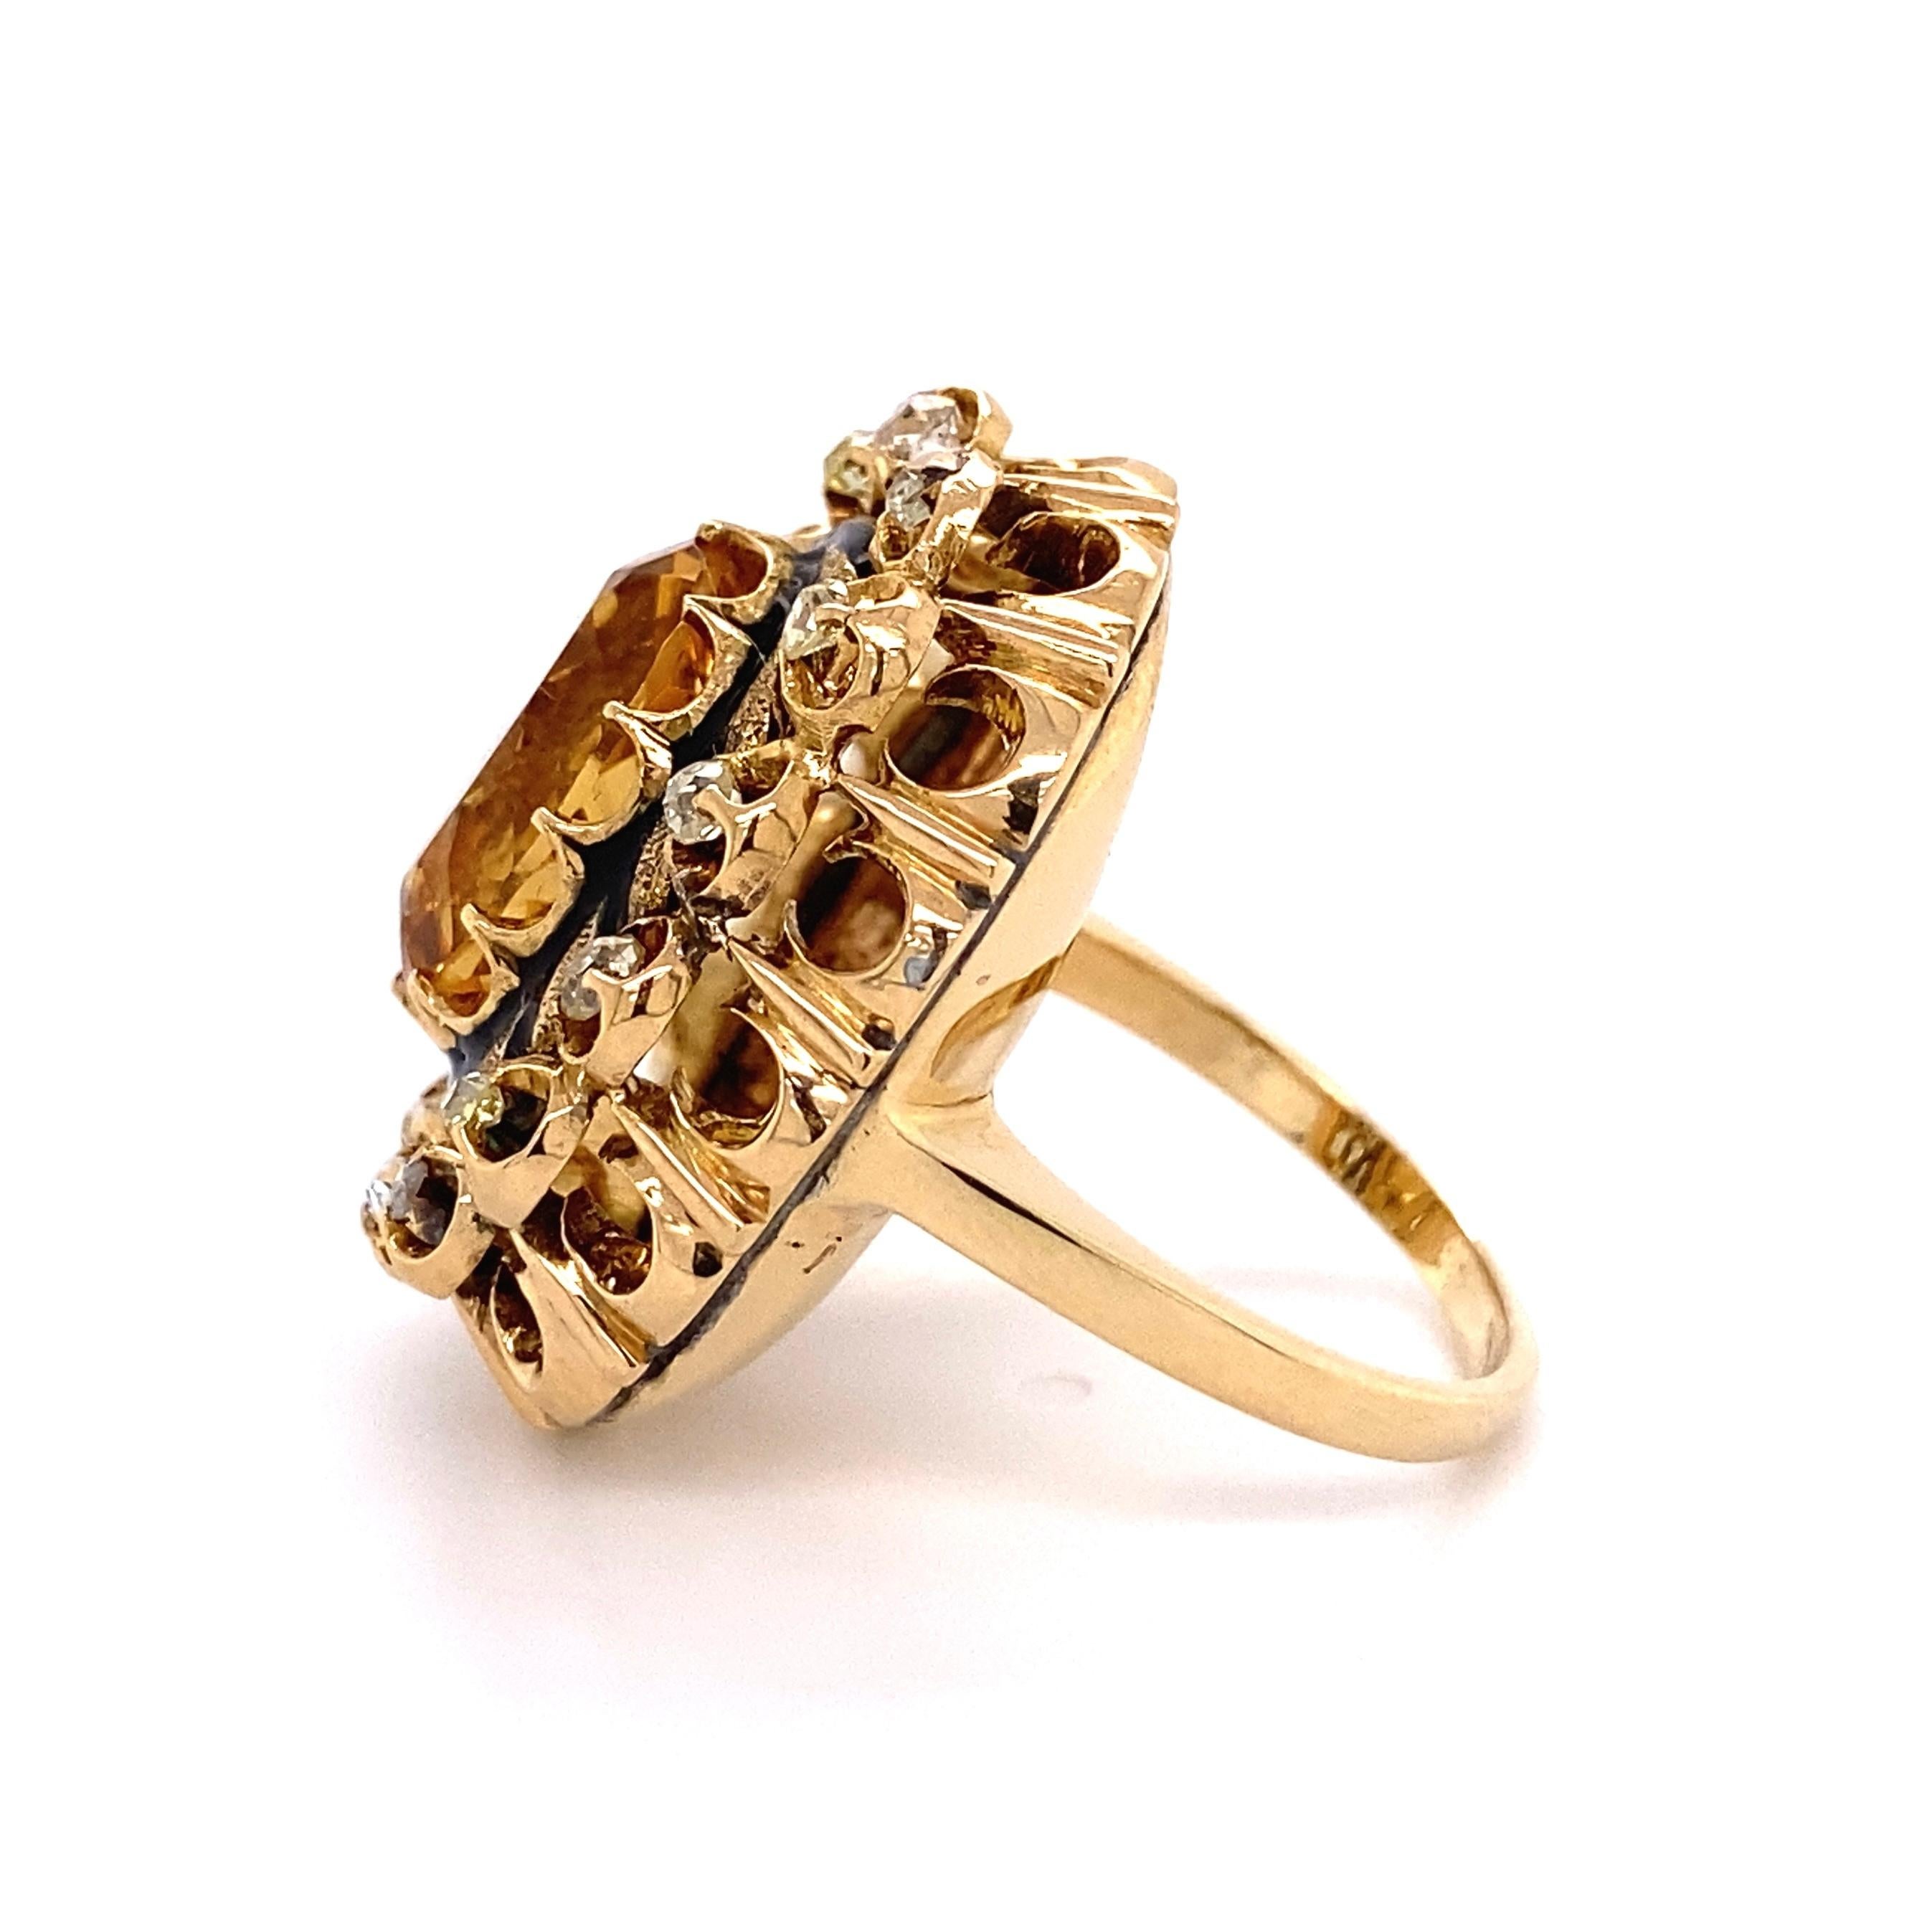 Mixed Cut 5 Carat Citrine and Diamond Victorian Gold Cocktail Ring Estate Fine Jewelry For Sale